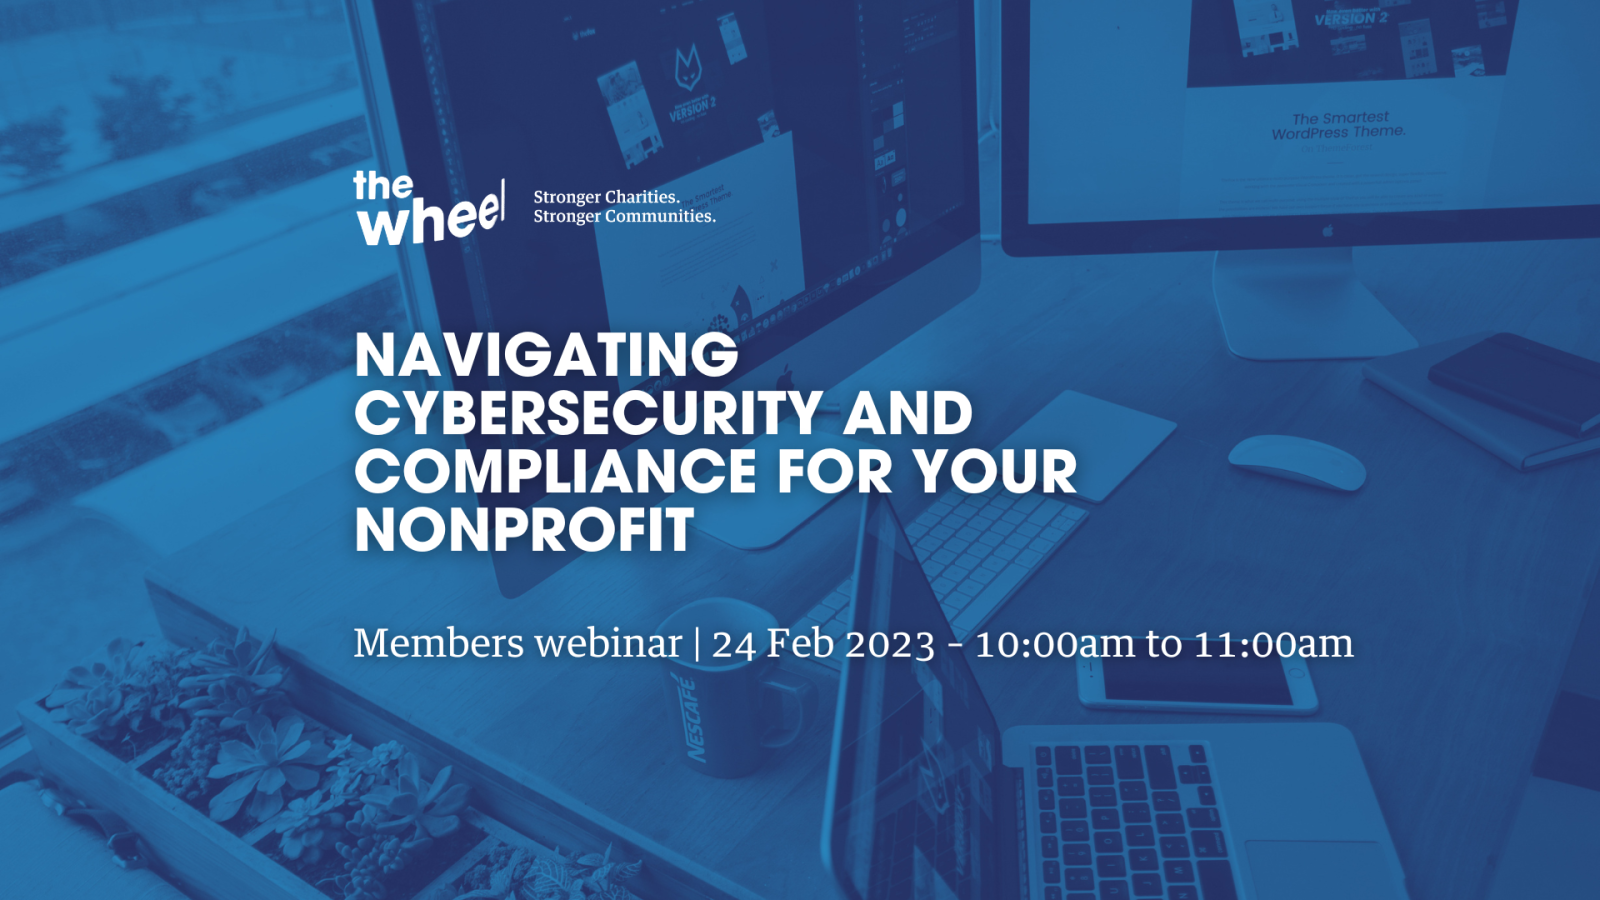 Navigating Cybersecurity and Compliance for Your Nonprofit (24 Feb 2023)